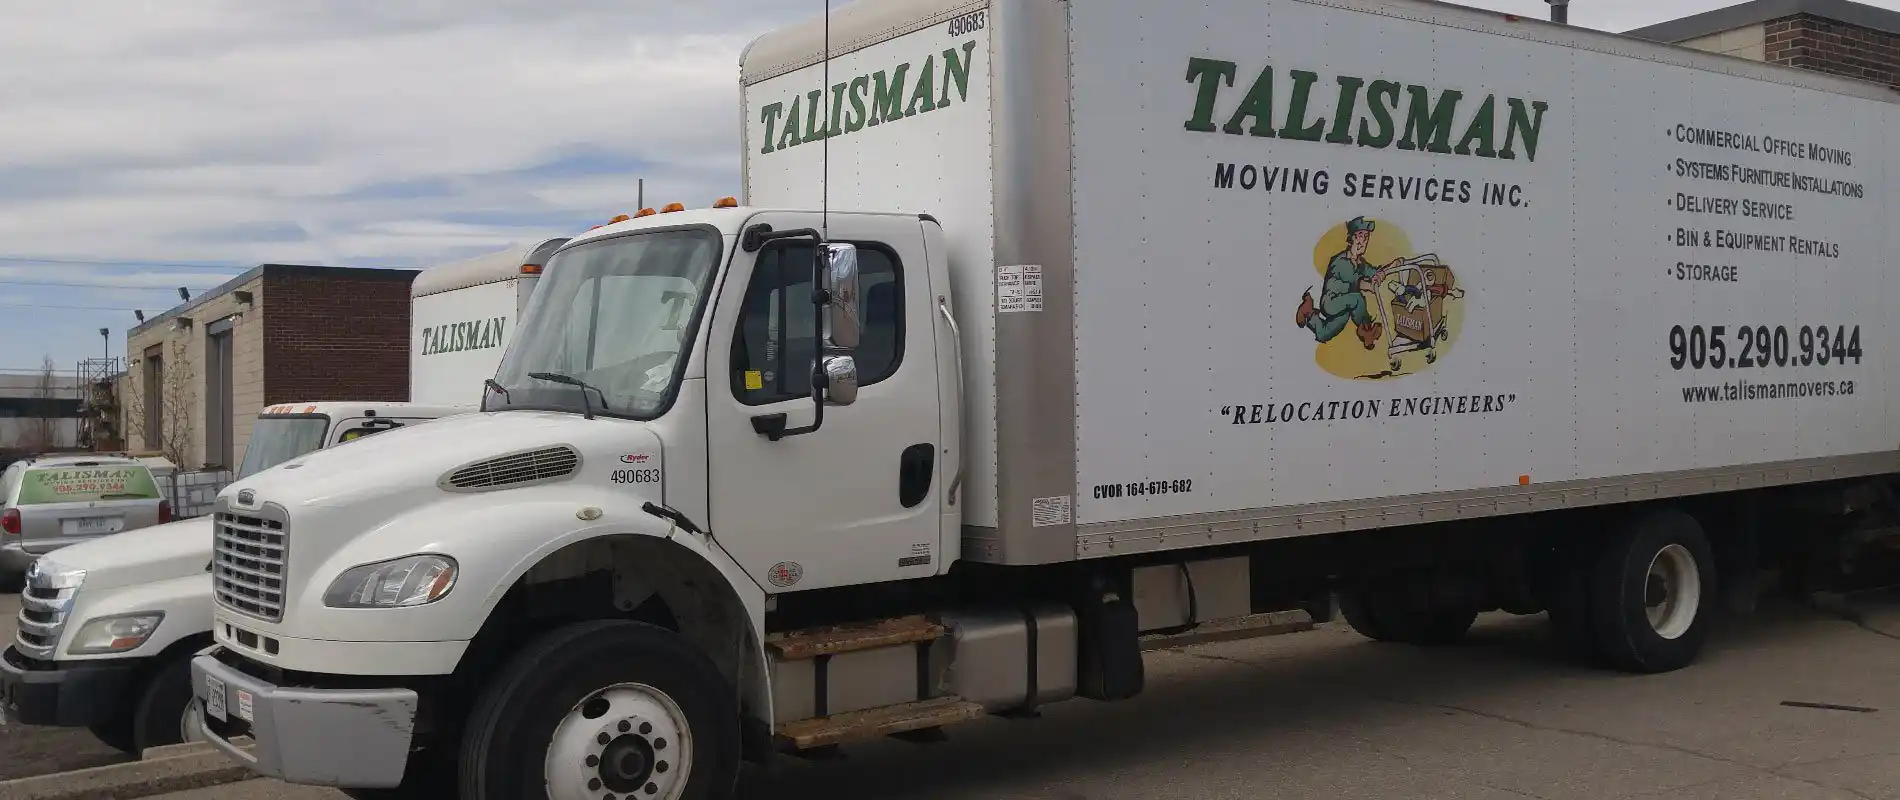 Talisman Movers can dispose your old office furniture